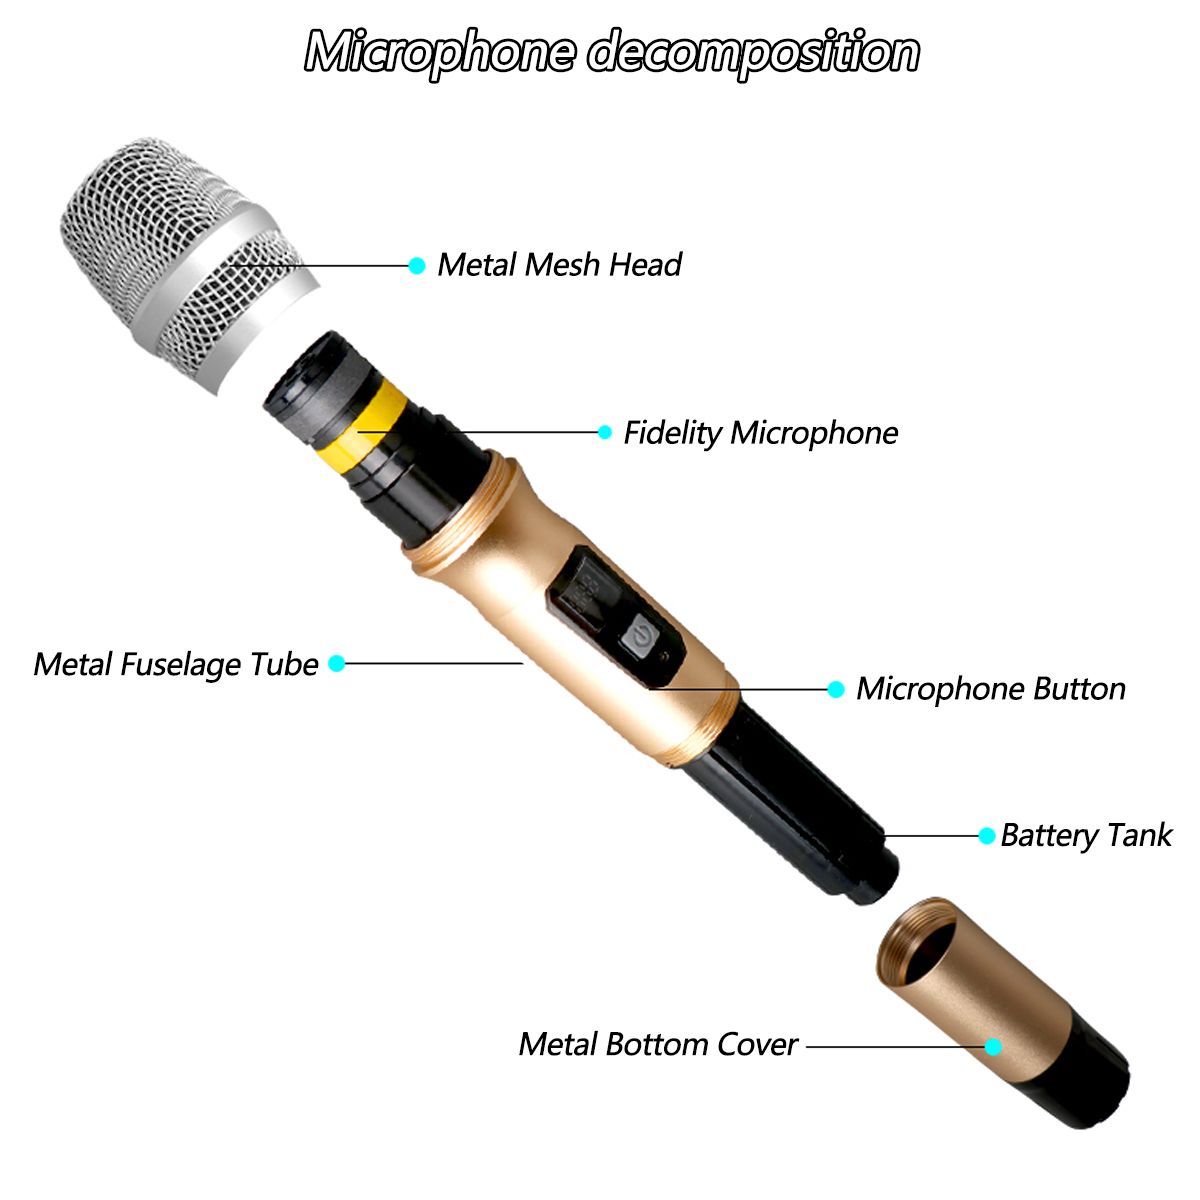 Portable-UHF-Wireless-Microphone-System-2-Handheld-Mics-Speaker-Player-with-Digital-Receiver-for-Sta-1530134